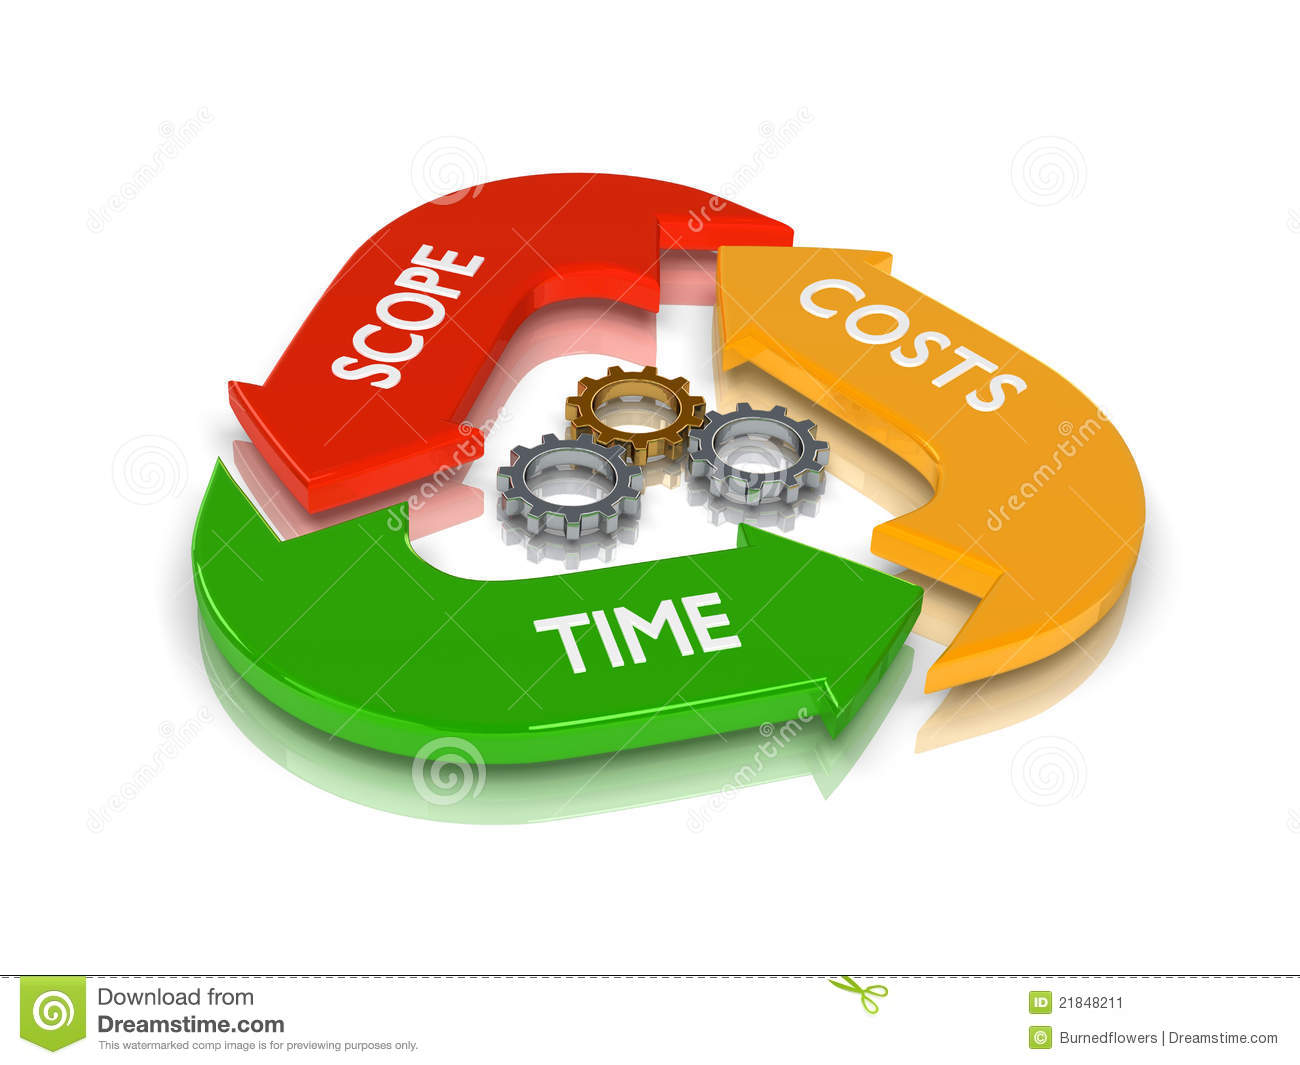 Project Management Triangle Stock Image   Image  21848211